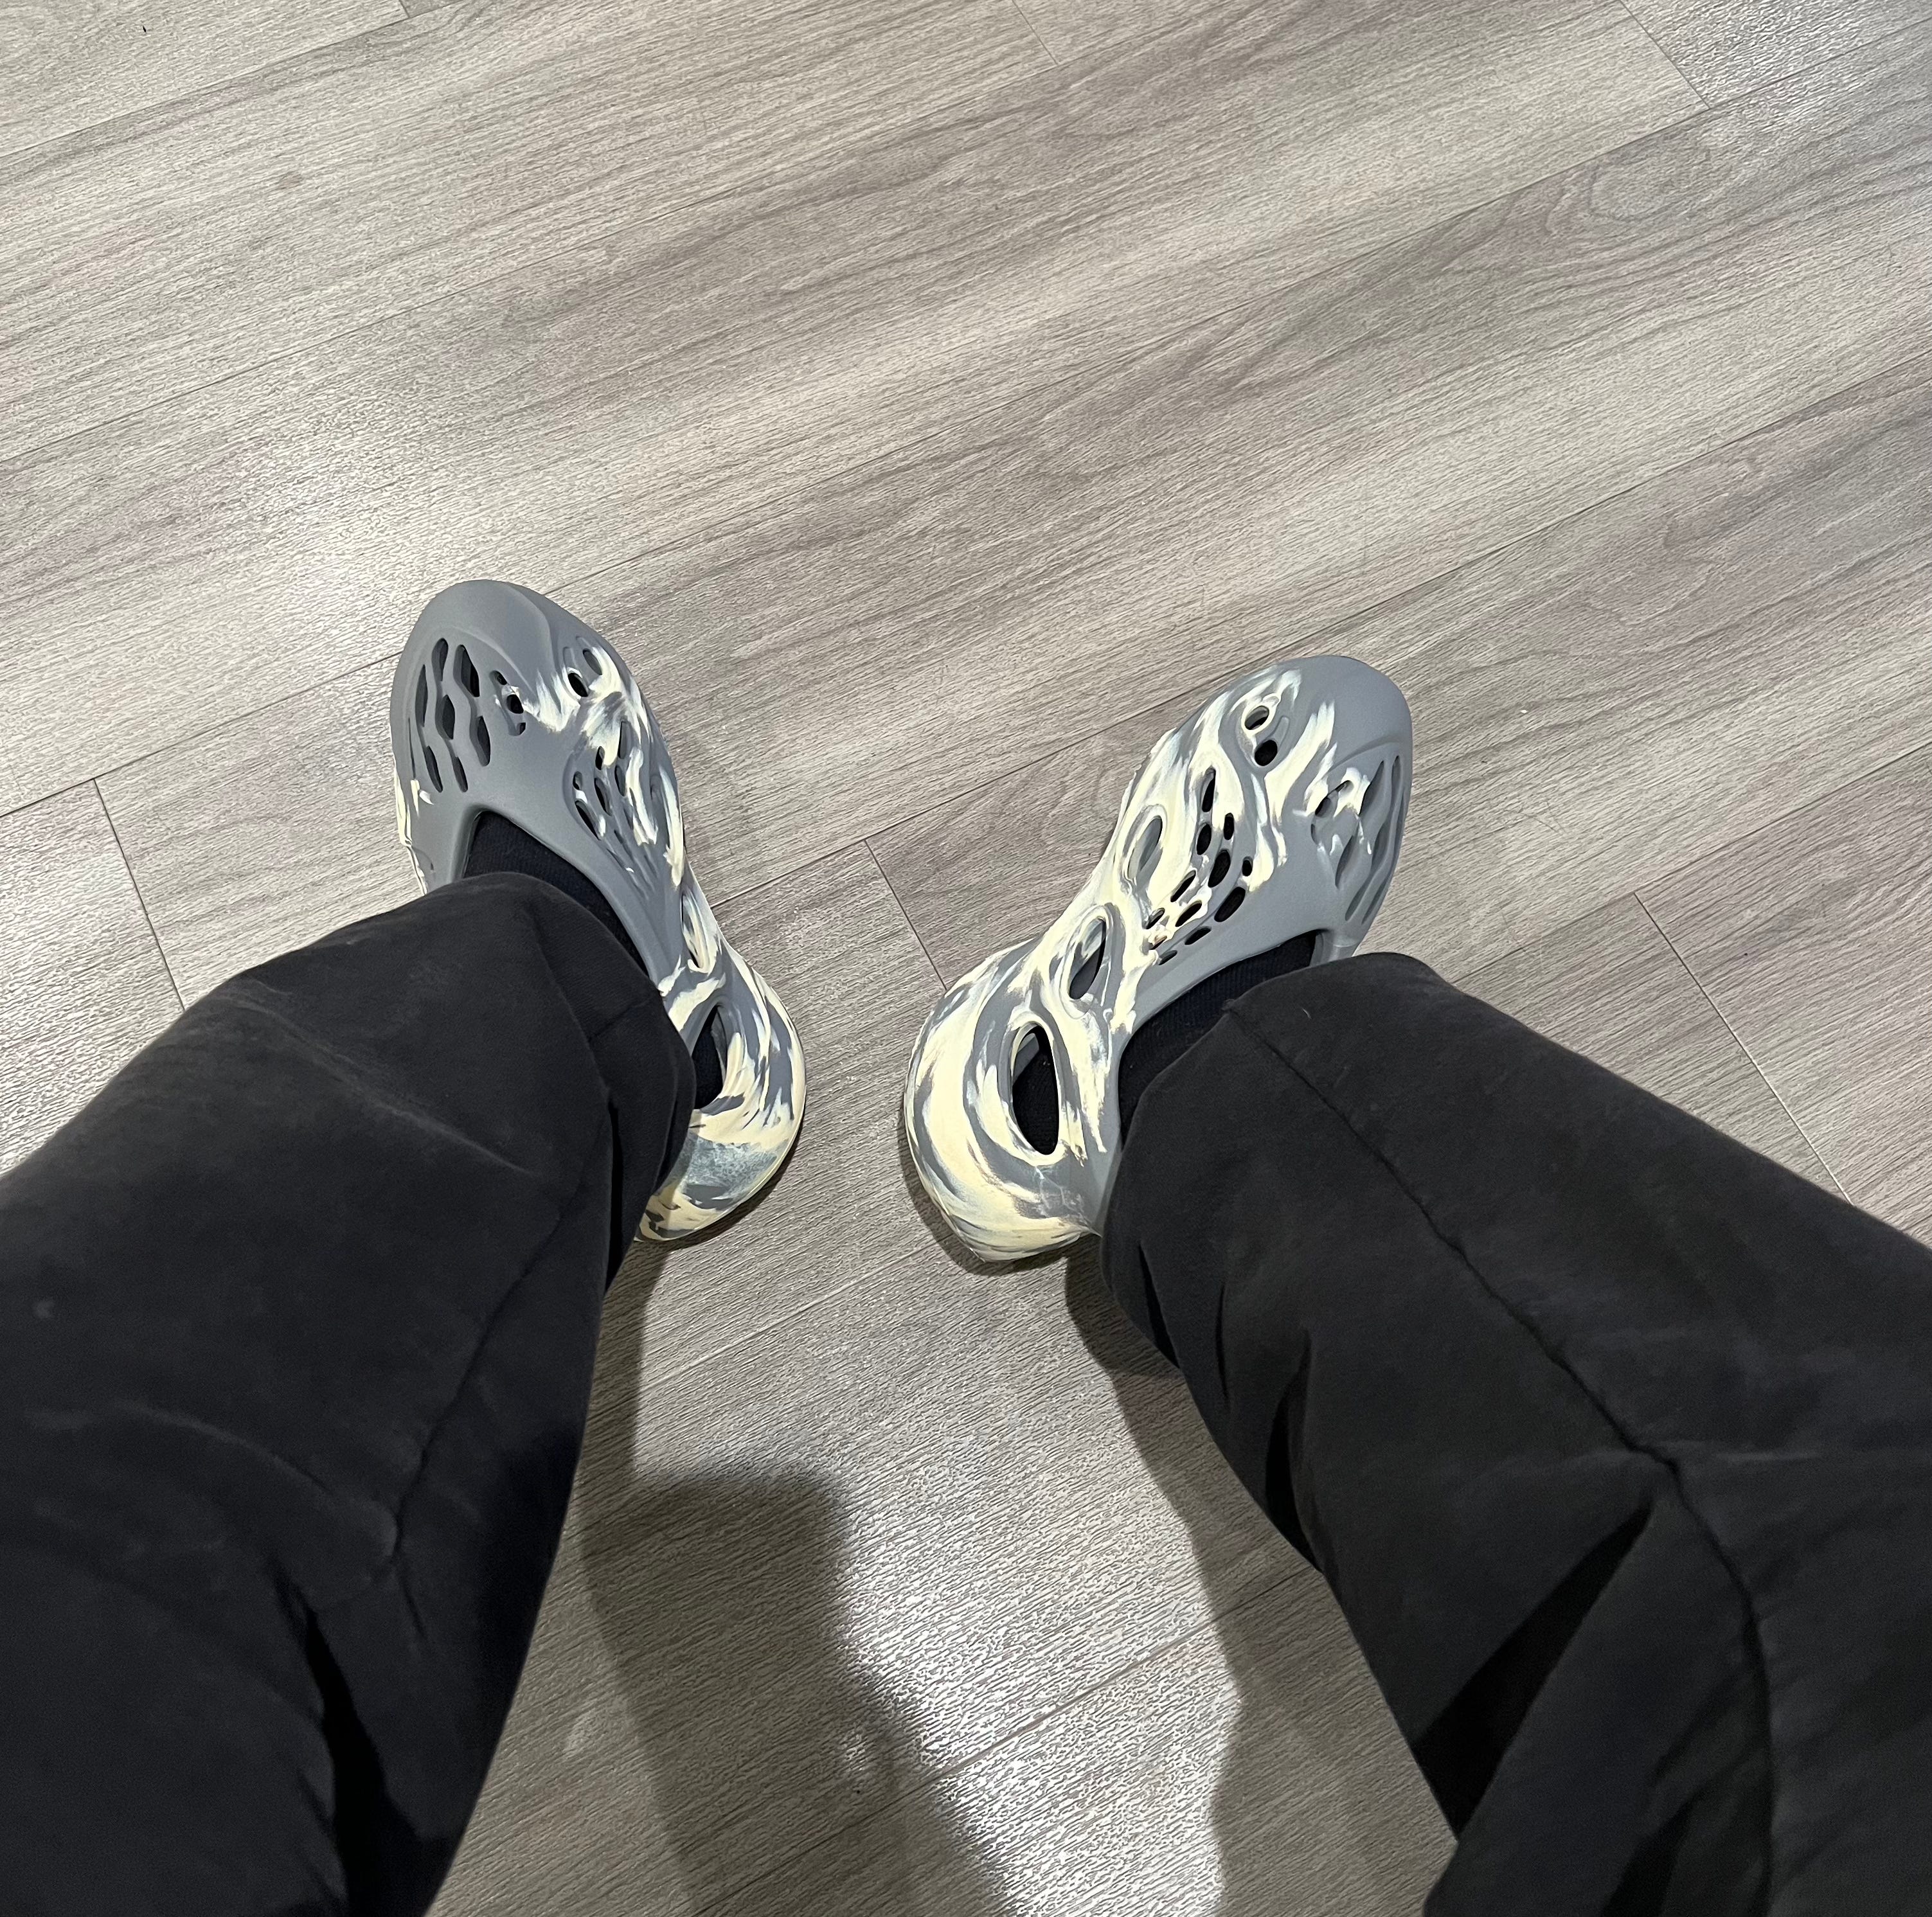 I Bought a Pair of Yeezy Foam Runners - JAKE WOOLF